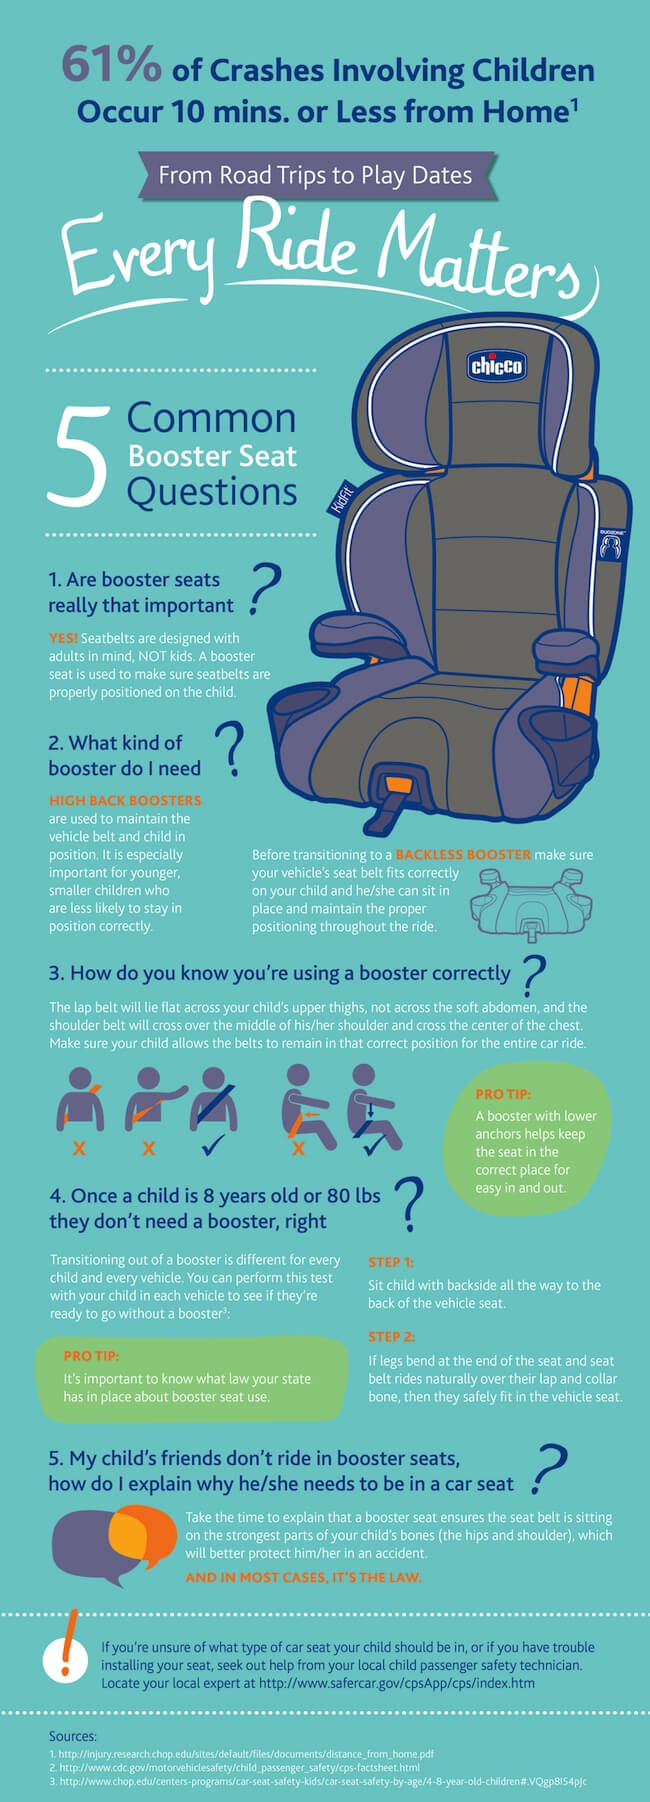 With so much information (and misinformation) out there, it can be confusing as a parent to know what is really safest! My daughter just turned 8, but is still pretty small, so I need to know: how long DOES a child need a booster seat? 